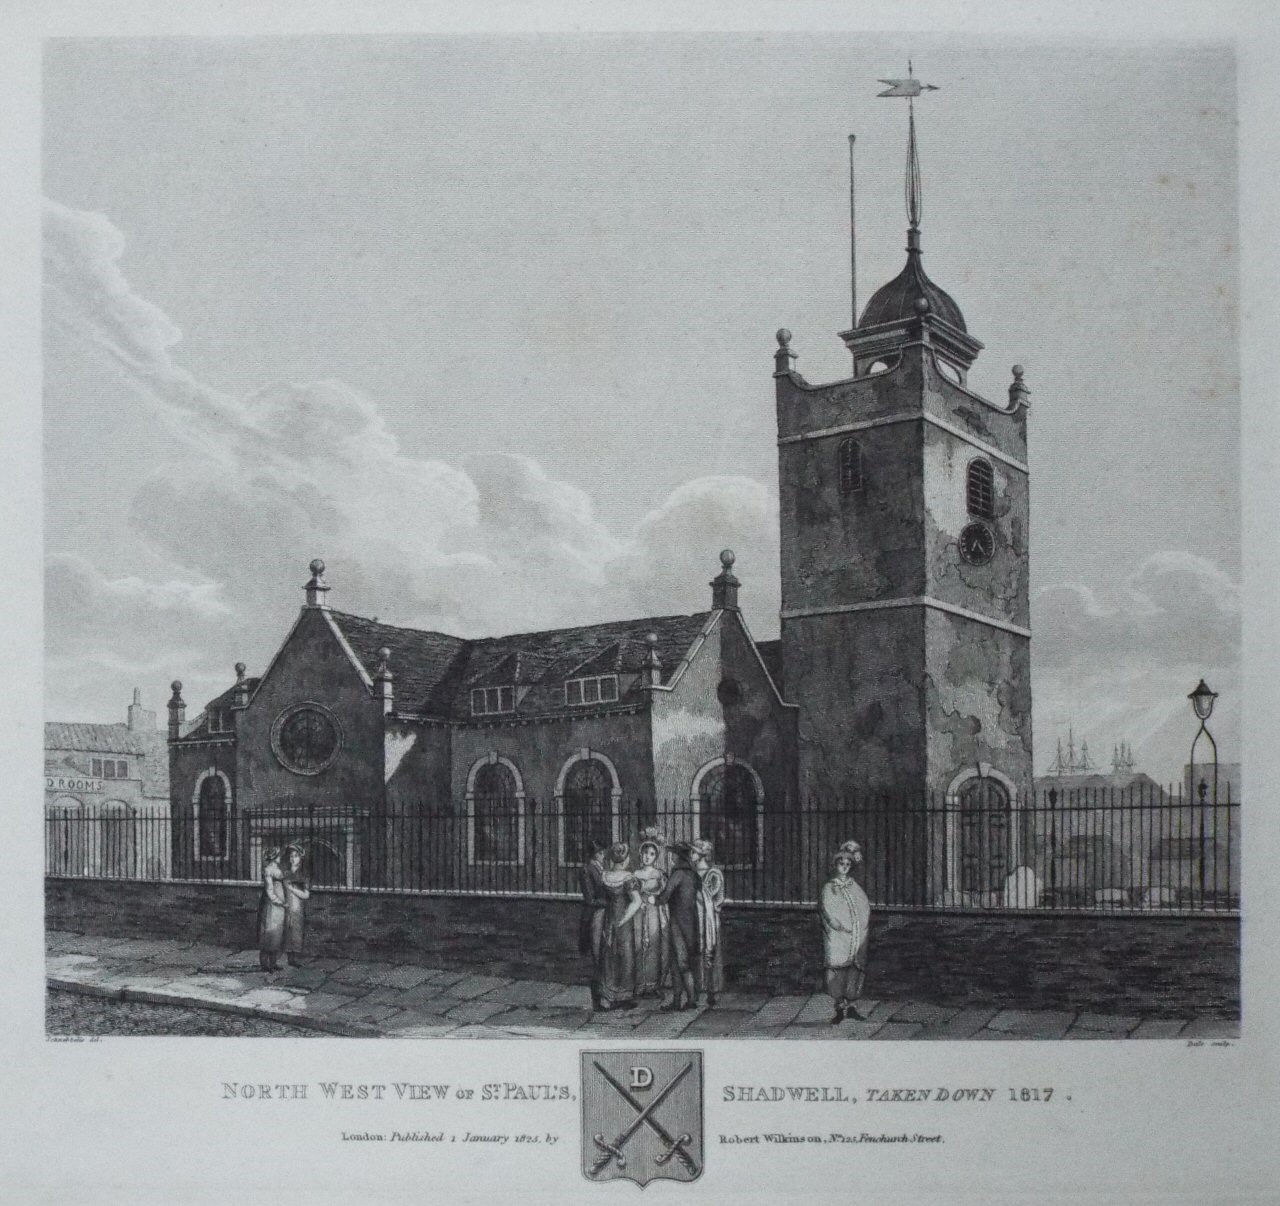 Print - North West View of St. Paul's, Shadwell, taken down 1817. - 